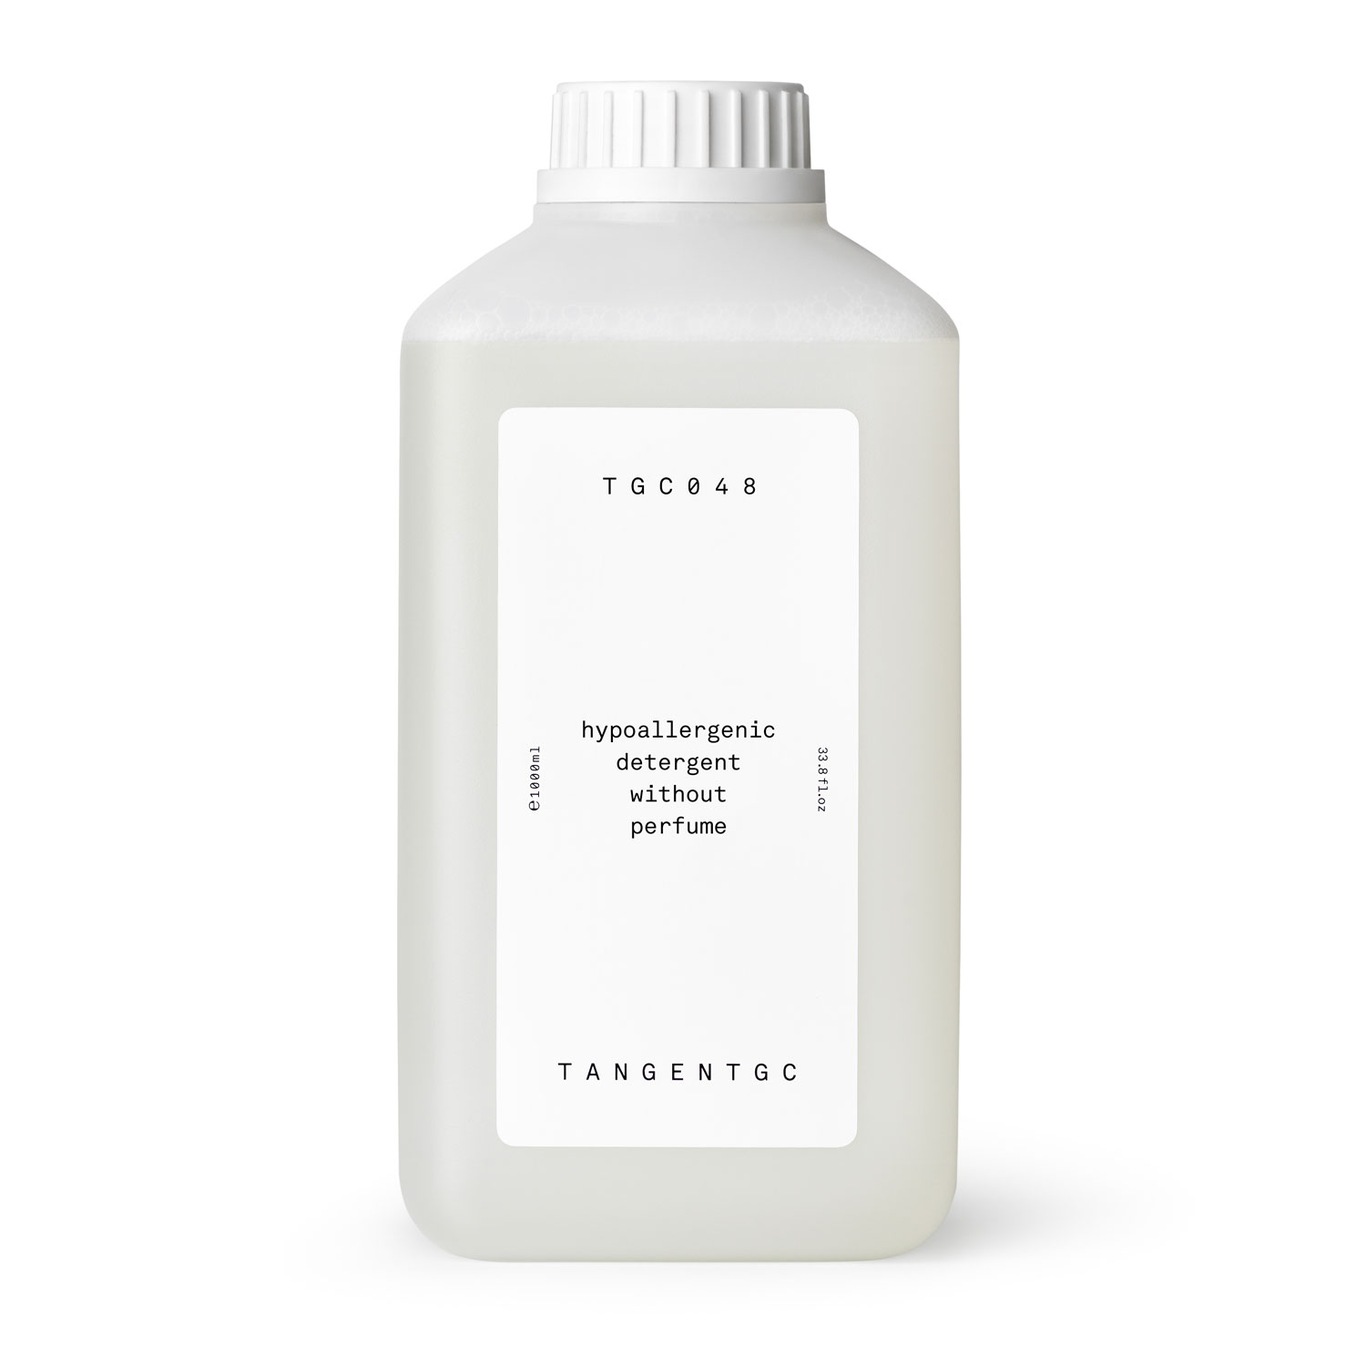 Detergent Without Perfume Allergy Friendly 1000 ml